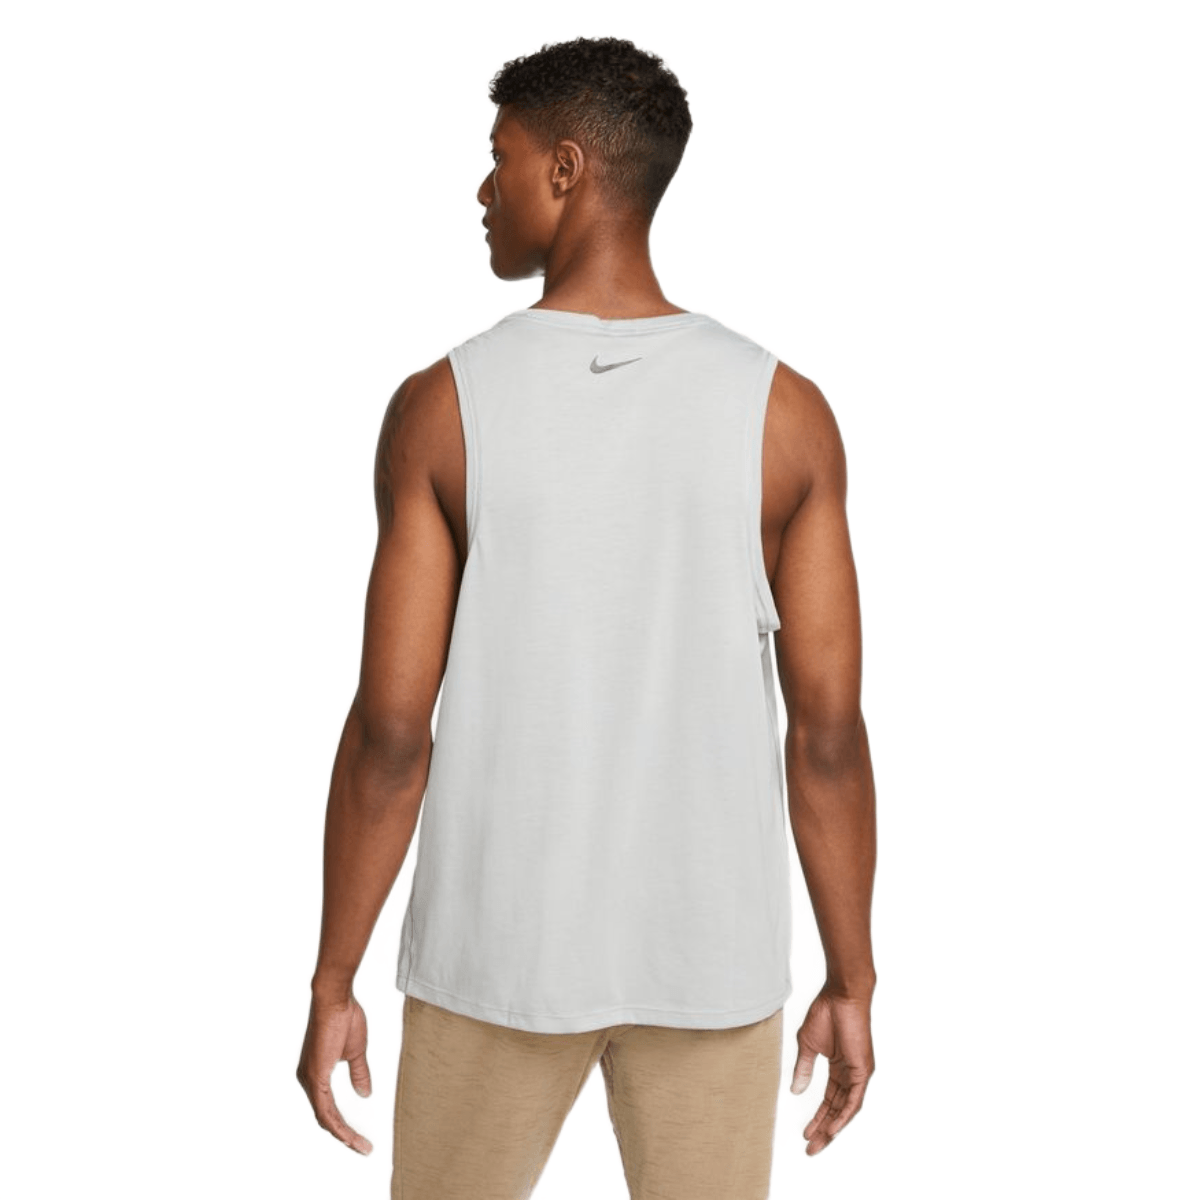 Nike Yoga Dri-FIT Tank - Men's - Al's Sporting Goods: Your One-Stop Shop  for Outdoor Sports Gear & Apparel